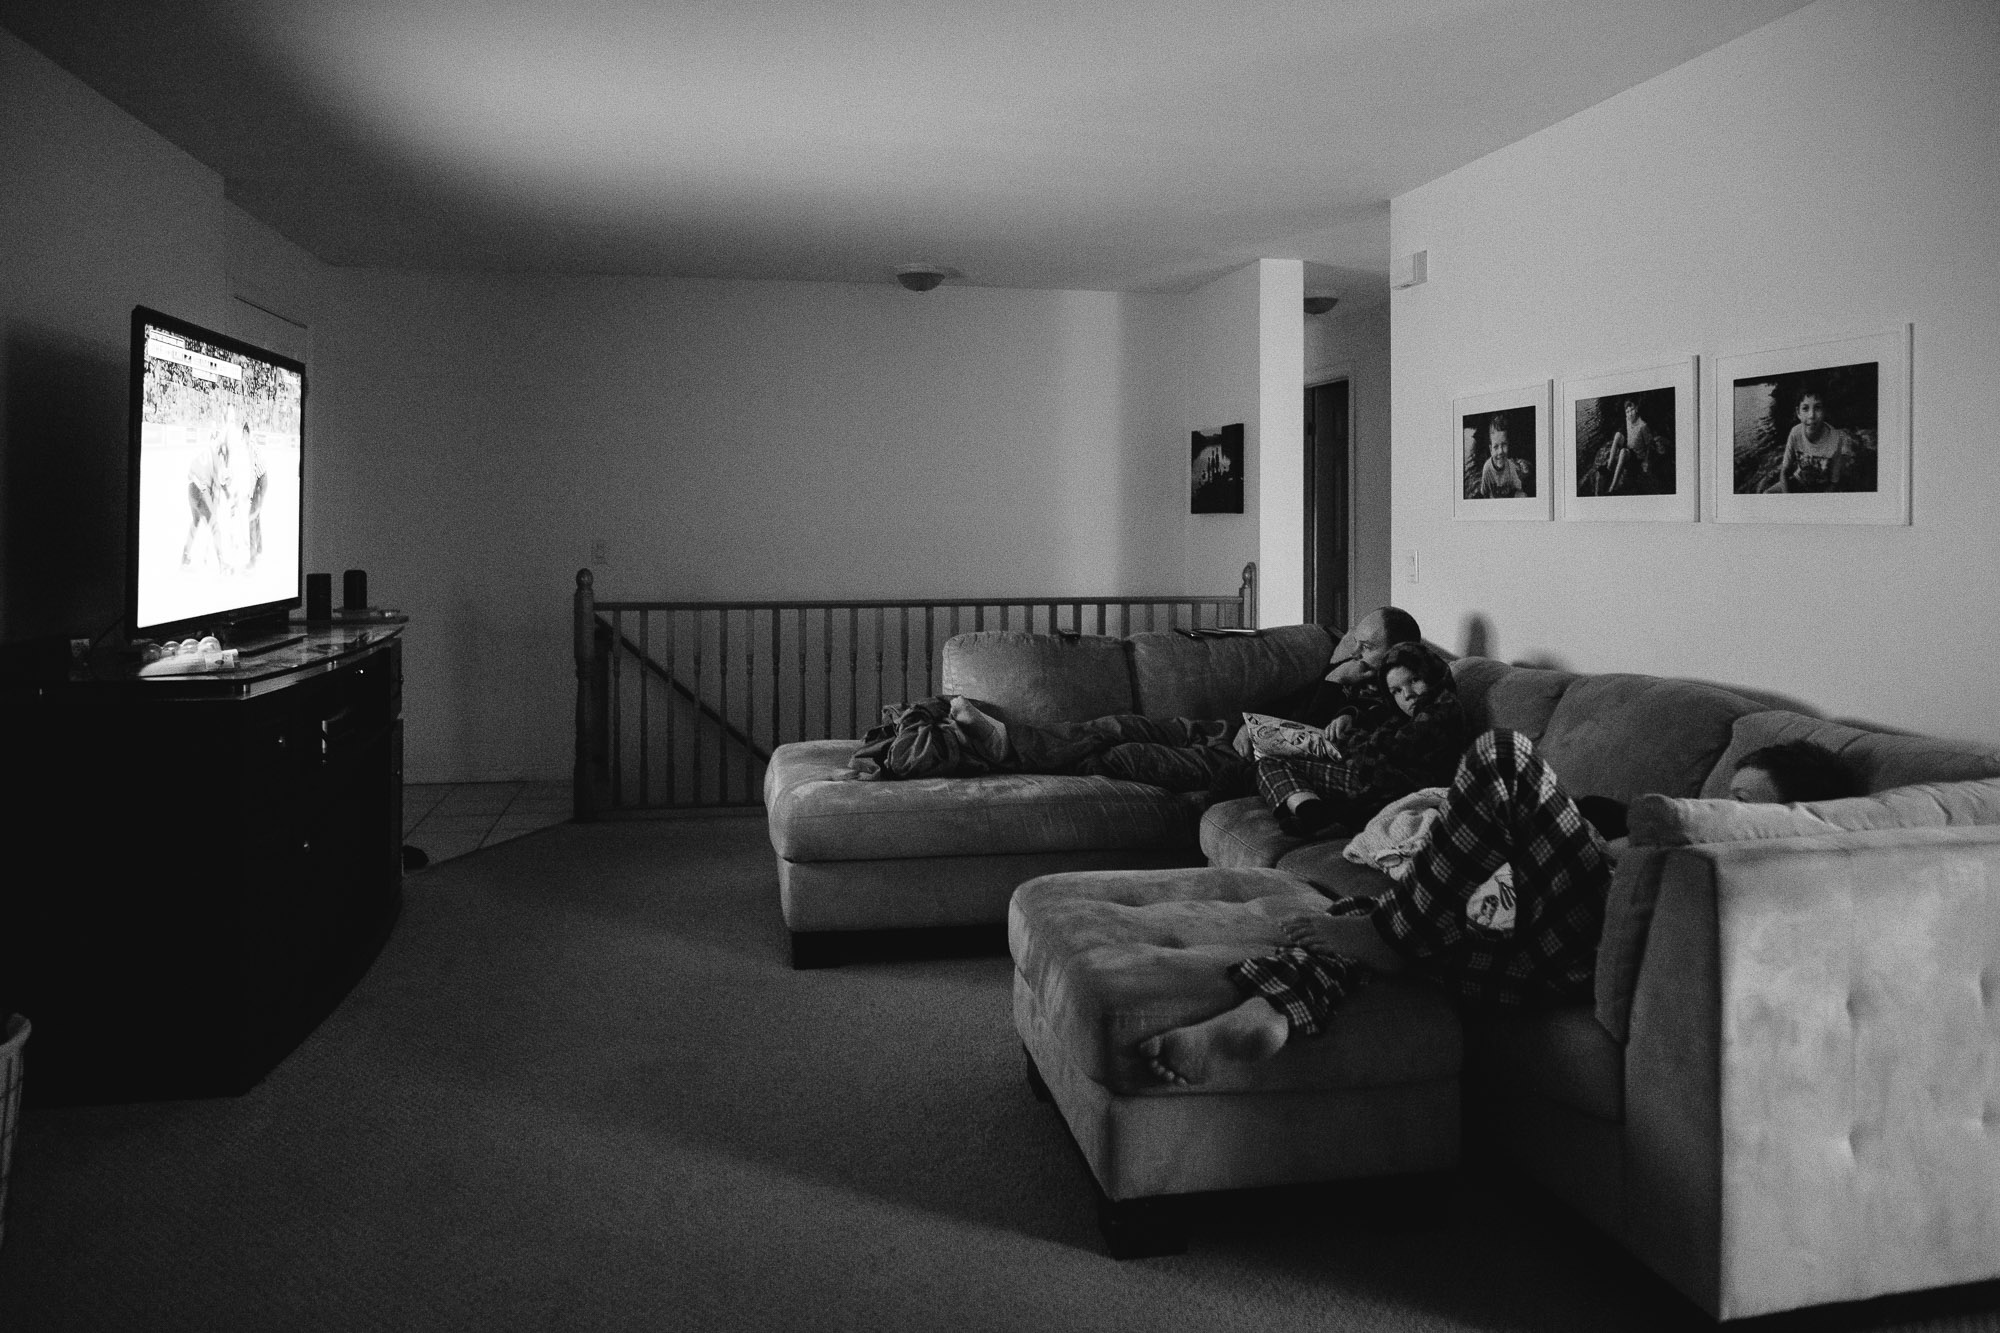 family watches TV on couch - documentary family photography